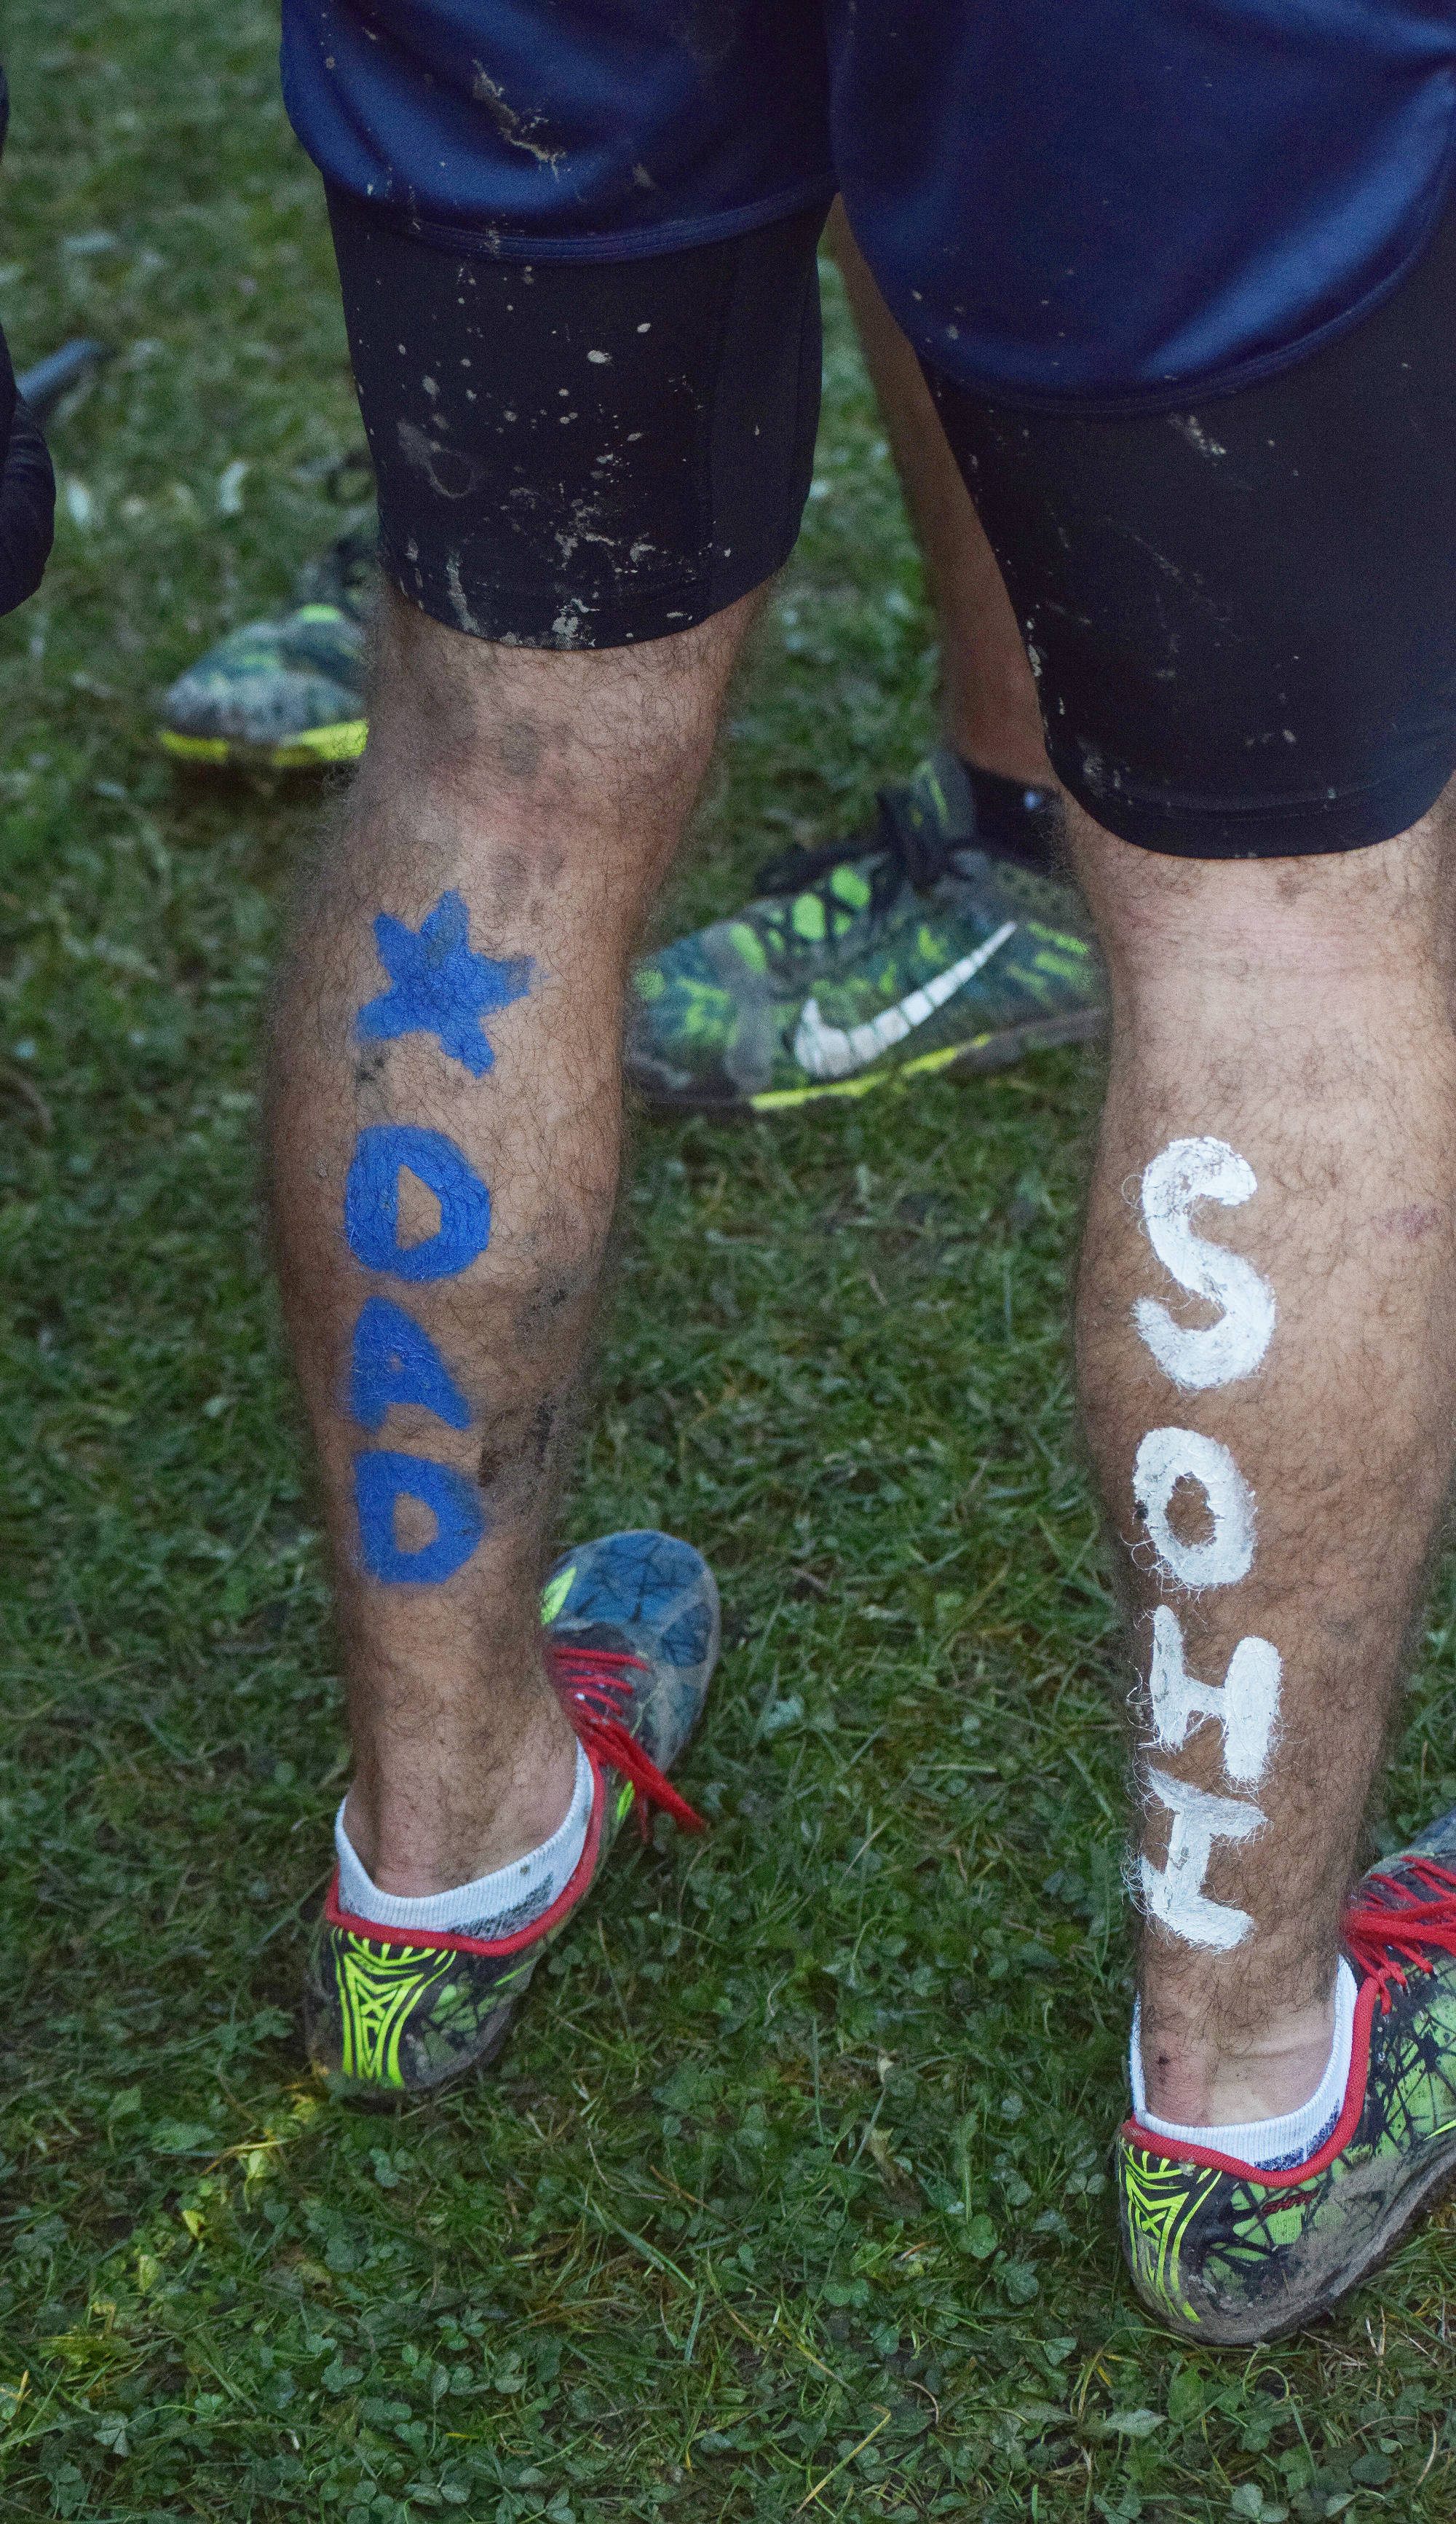 Body paint decorates the calves of Soldotna’s Koby Vinson after the Division I boys race Saturday at the ASAA First National Bank Alaska Cross-country State Championships at Bartlett High School. (Photo by Joey Klecka/Peninsula Clarion)